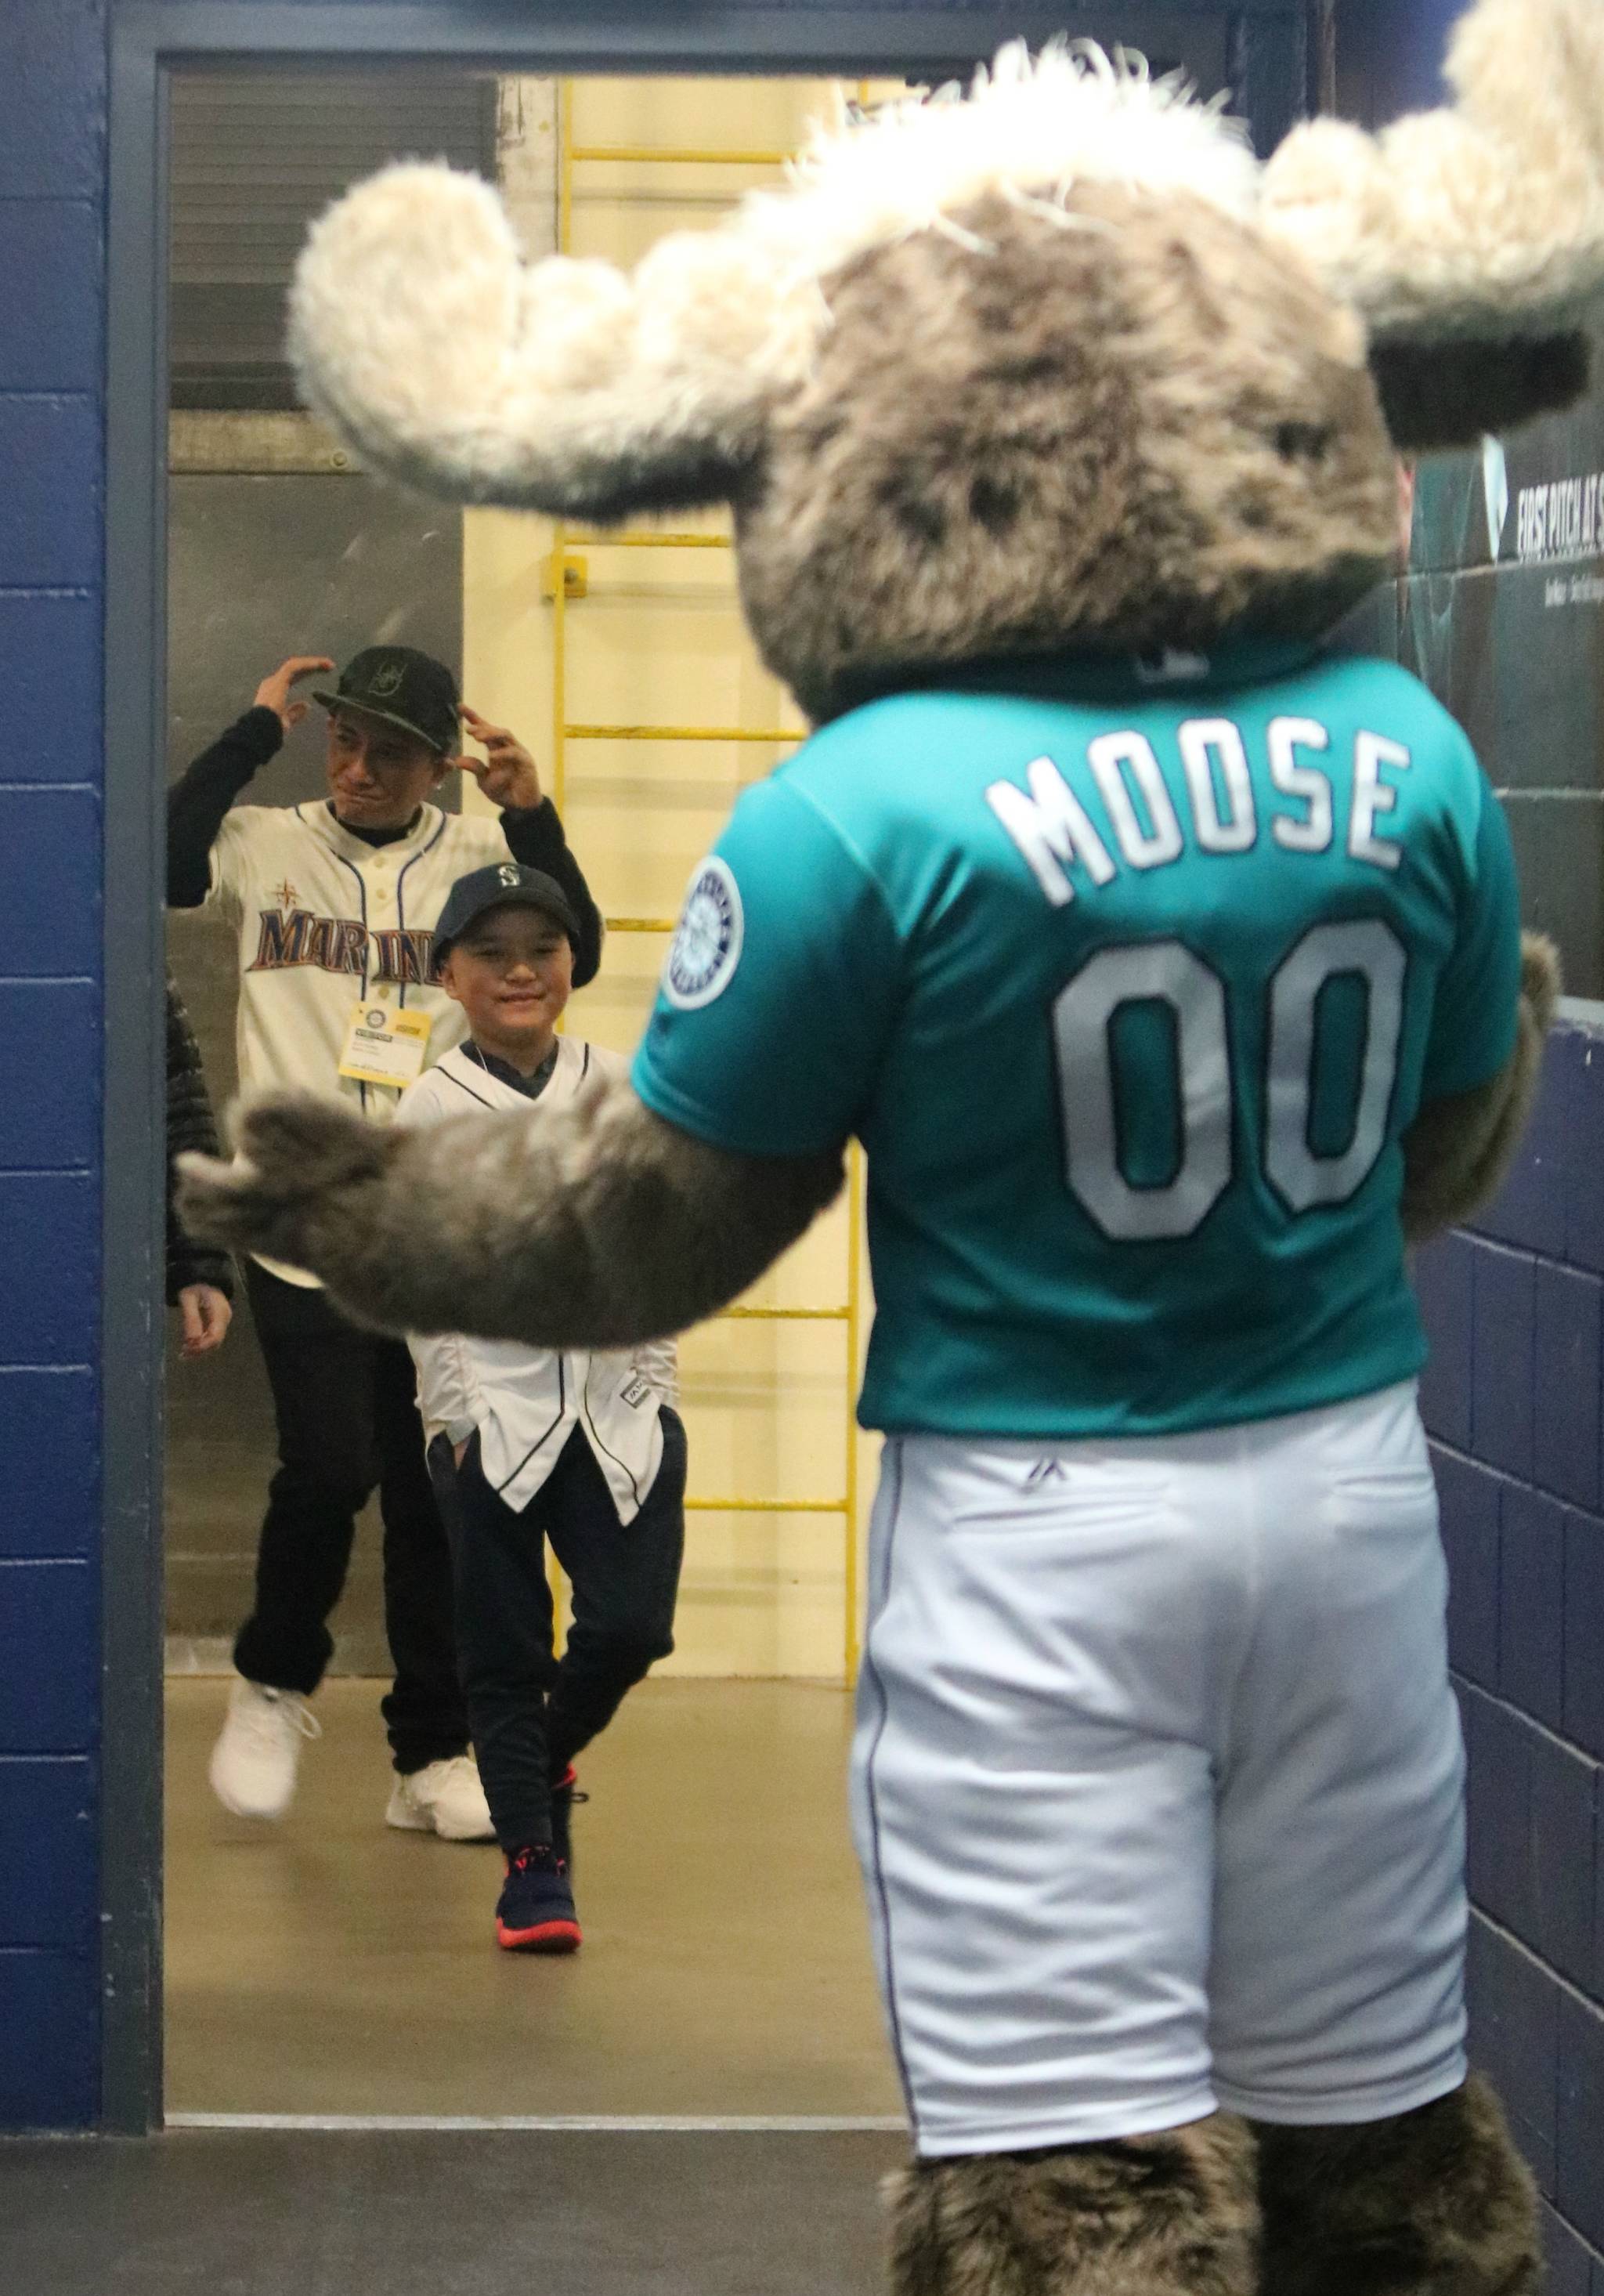 The Mariner Moose greets Dakota and Darrin Butteris. Andy Nystrom / staff photo